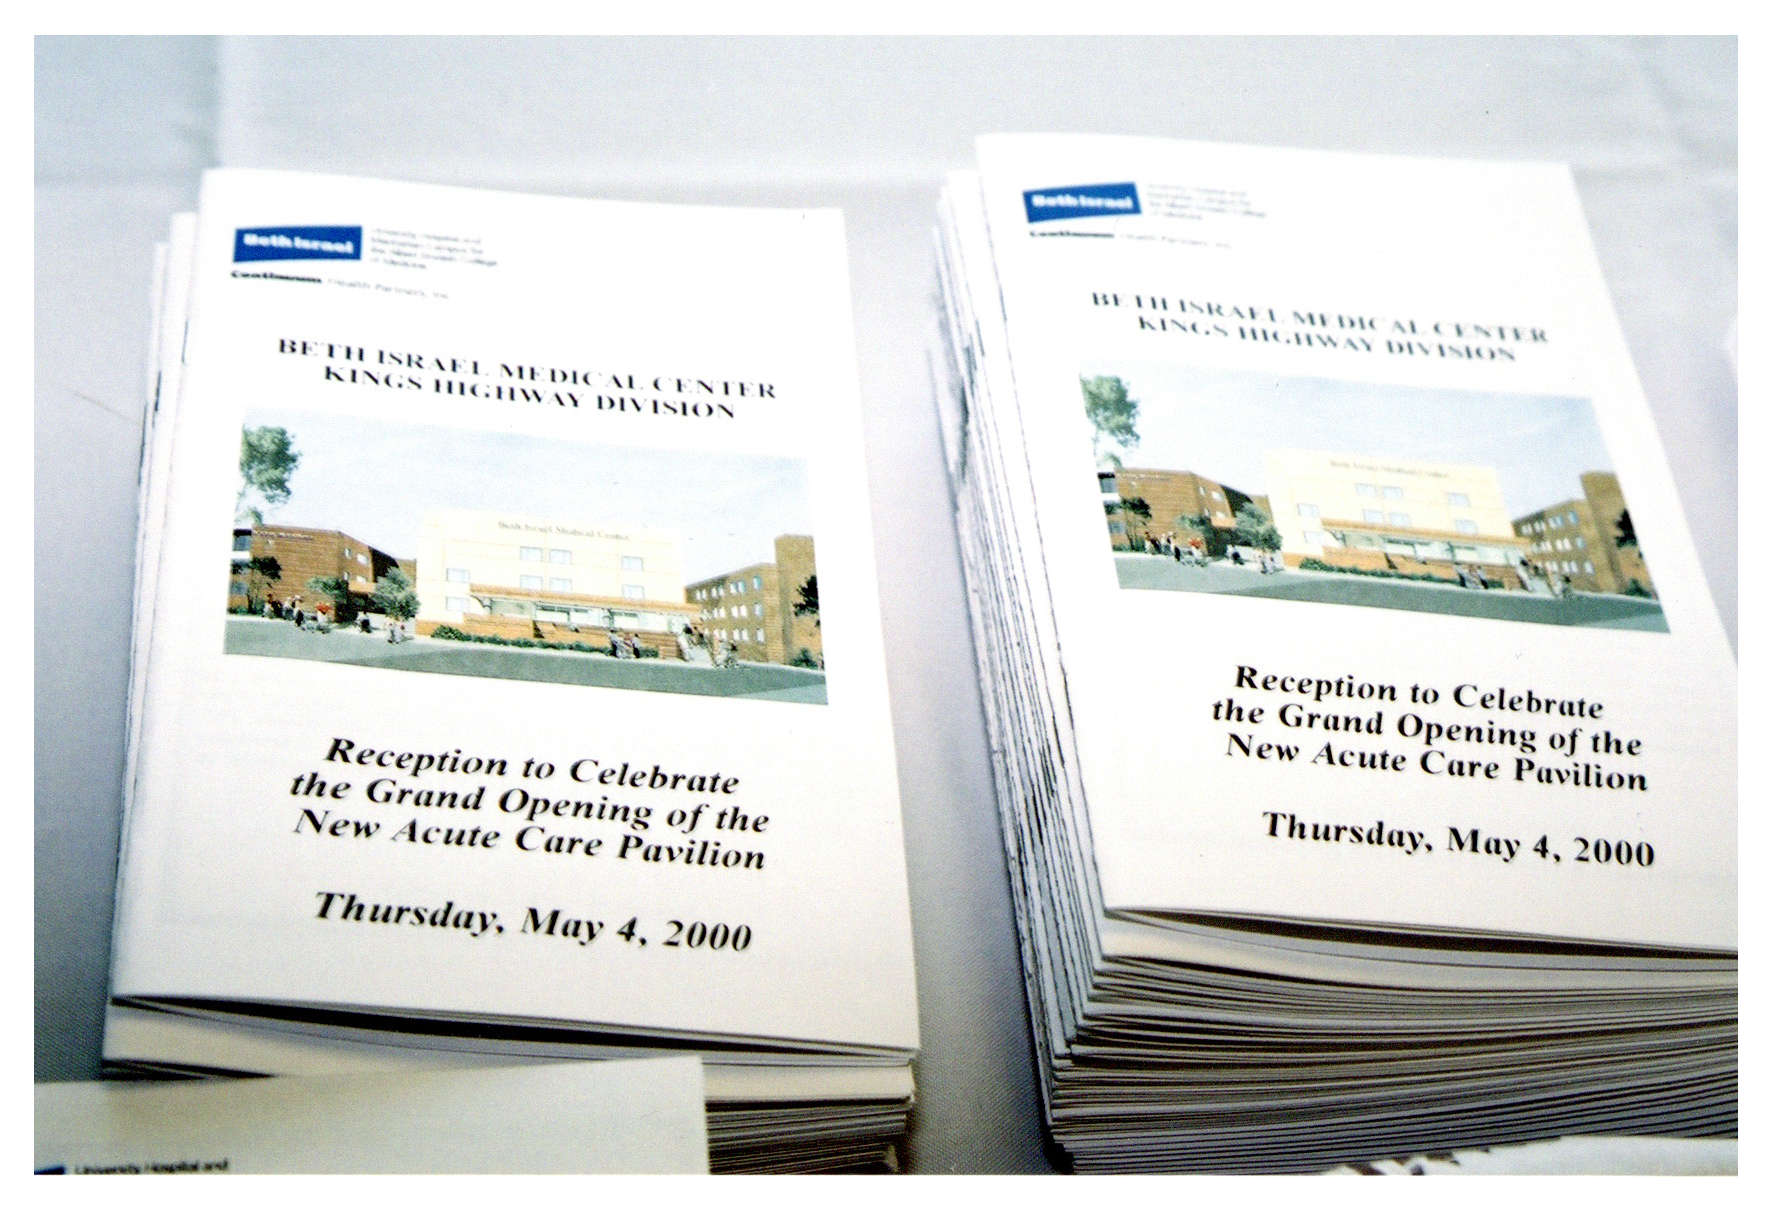 Image of programs for Acute Care Pavilion opening reception